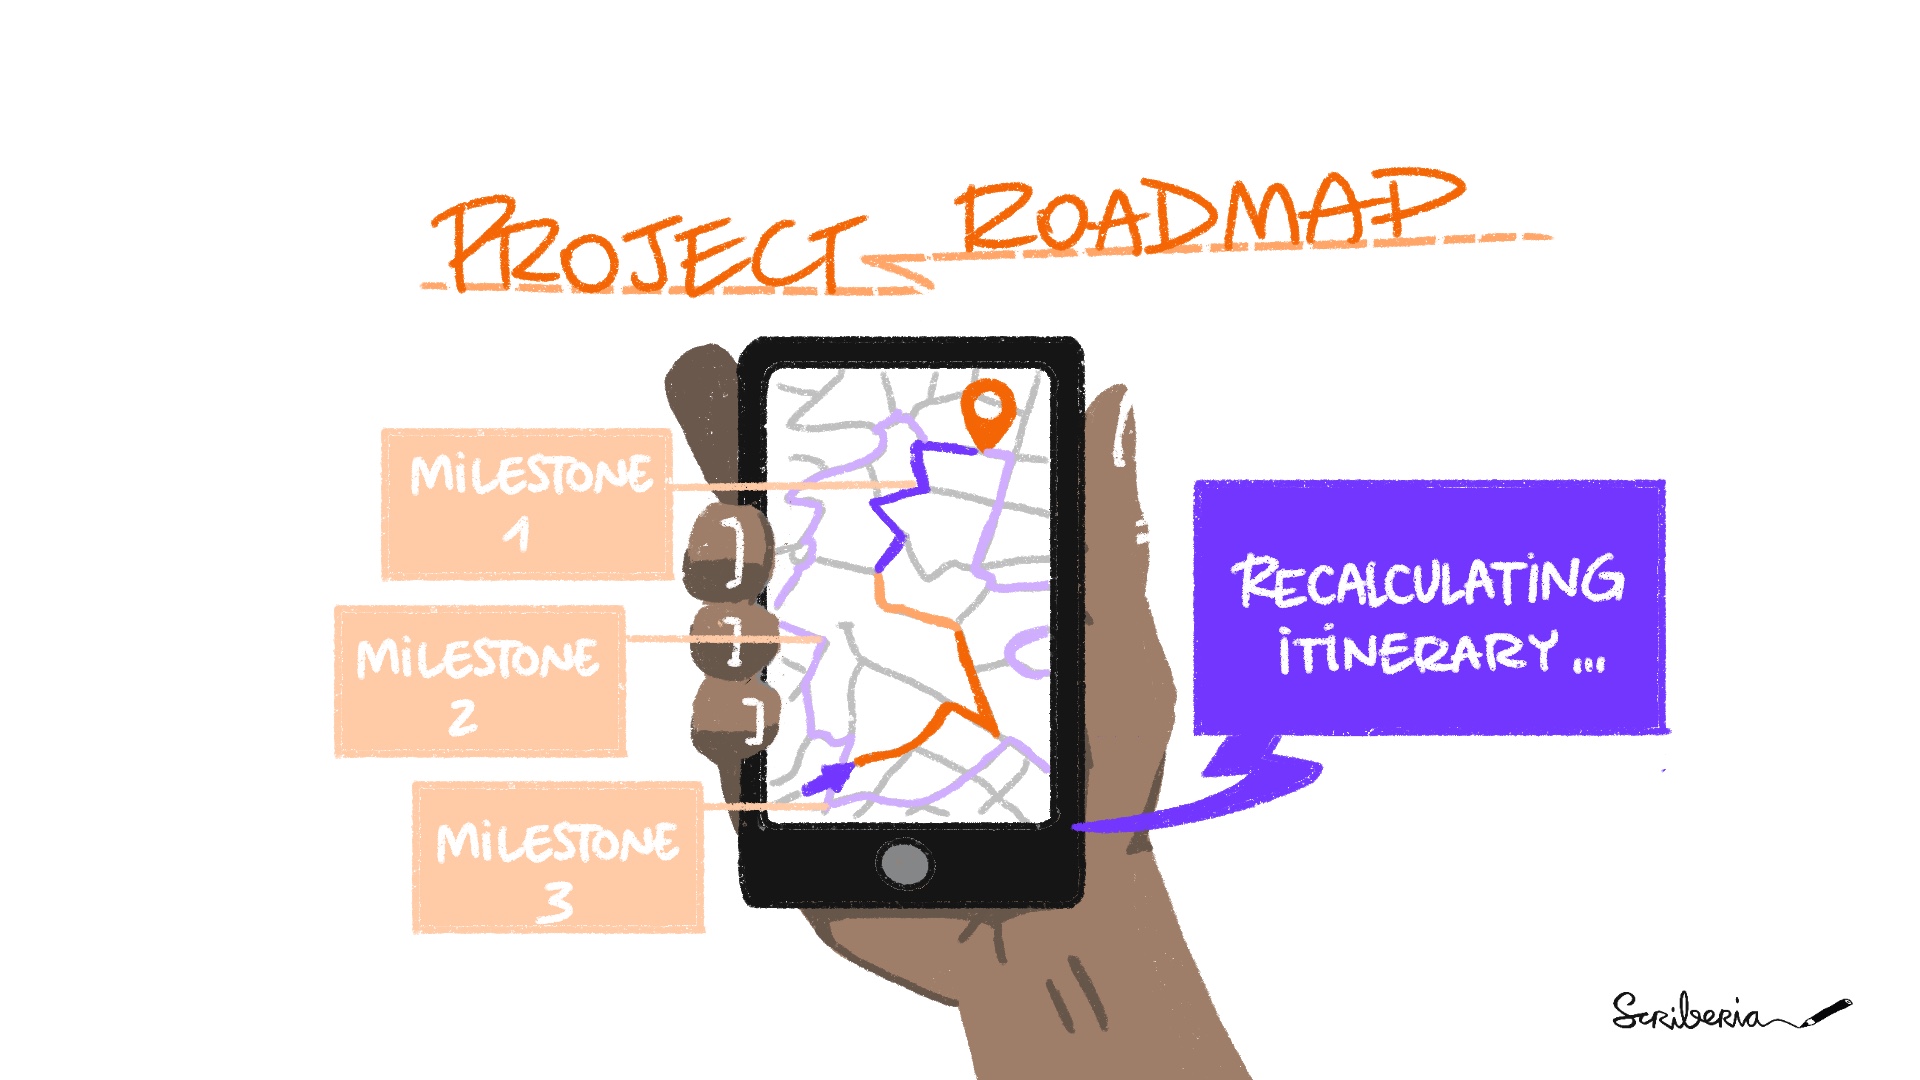 image shows a hand holding a smartphone with a map that is marked with milestones 1, 2 and 3. This phone app for map or navigator analogy is helpful to understand milestones and project roadmaps in research projects.